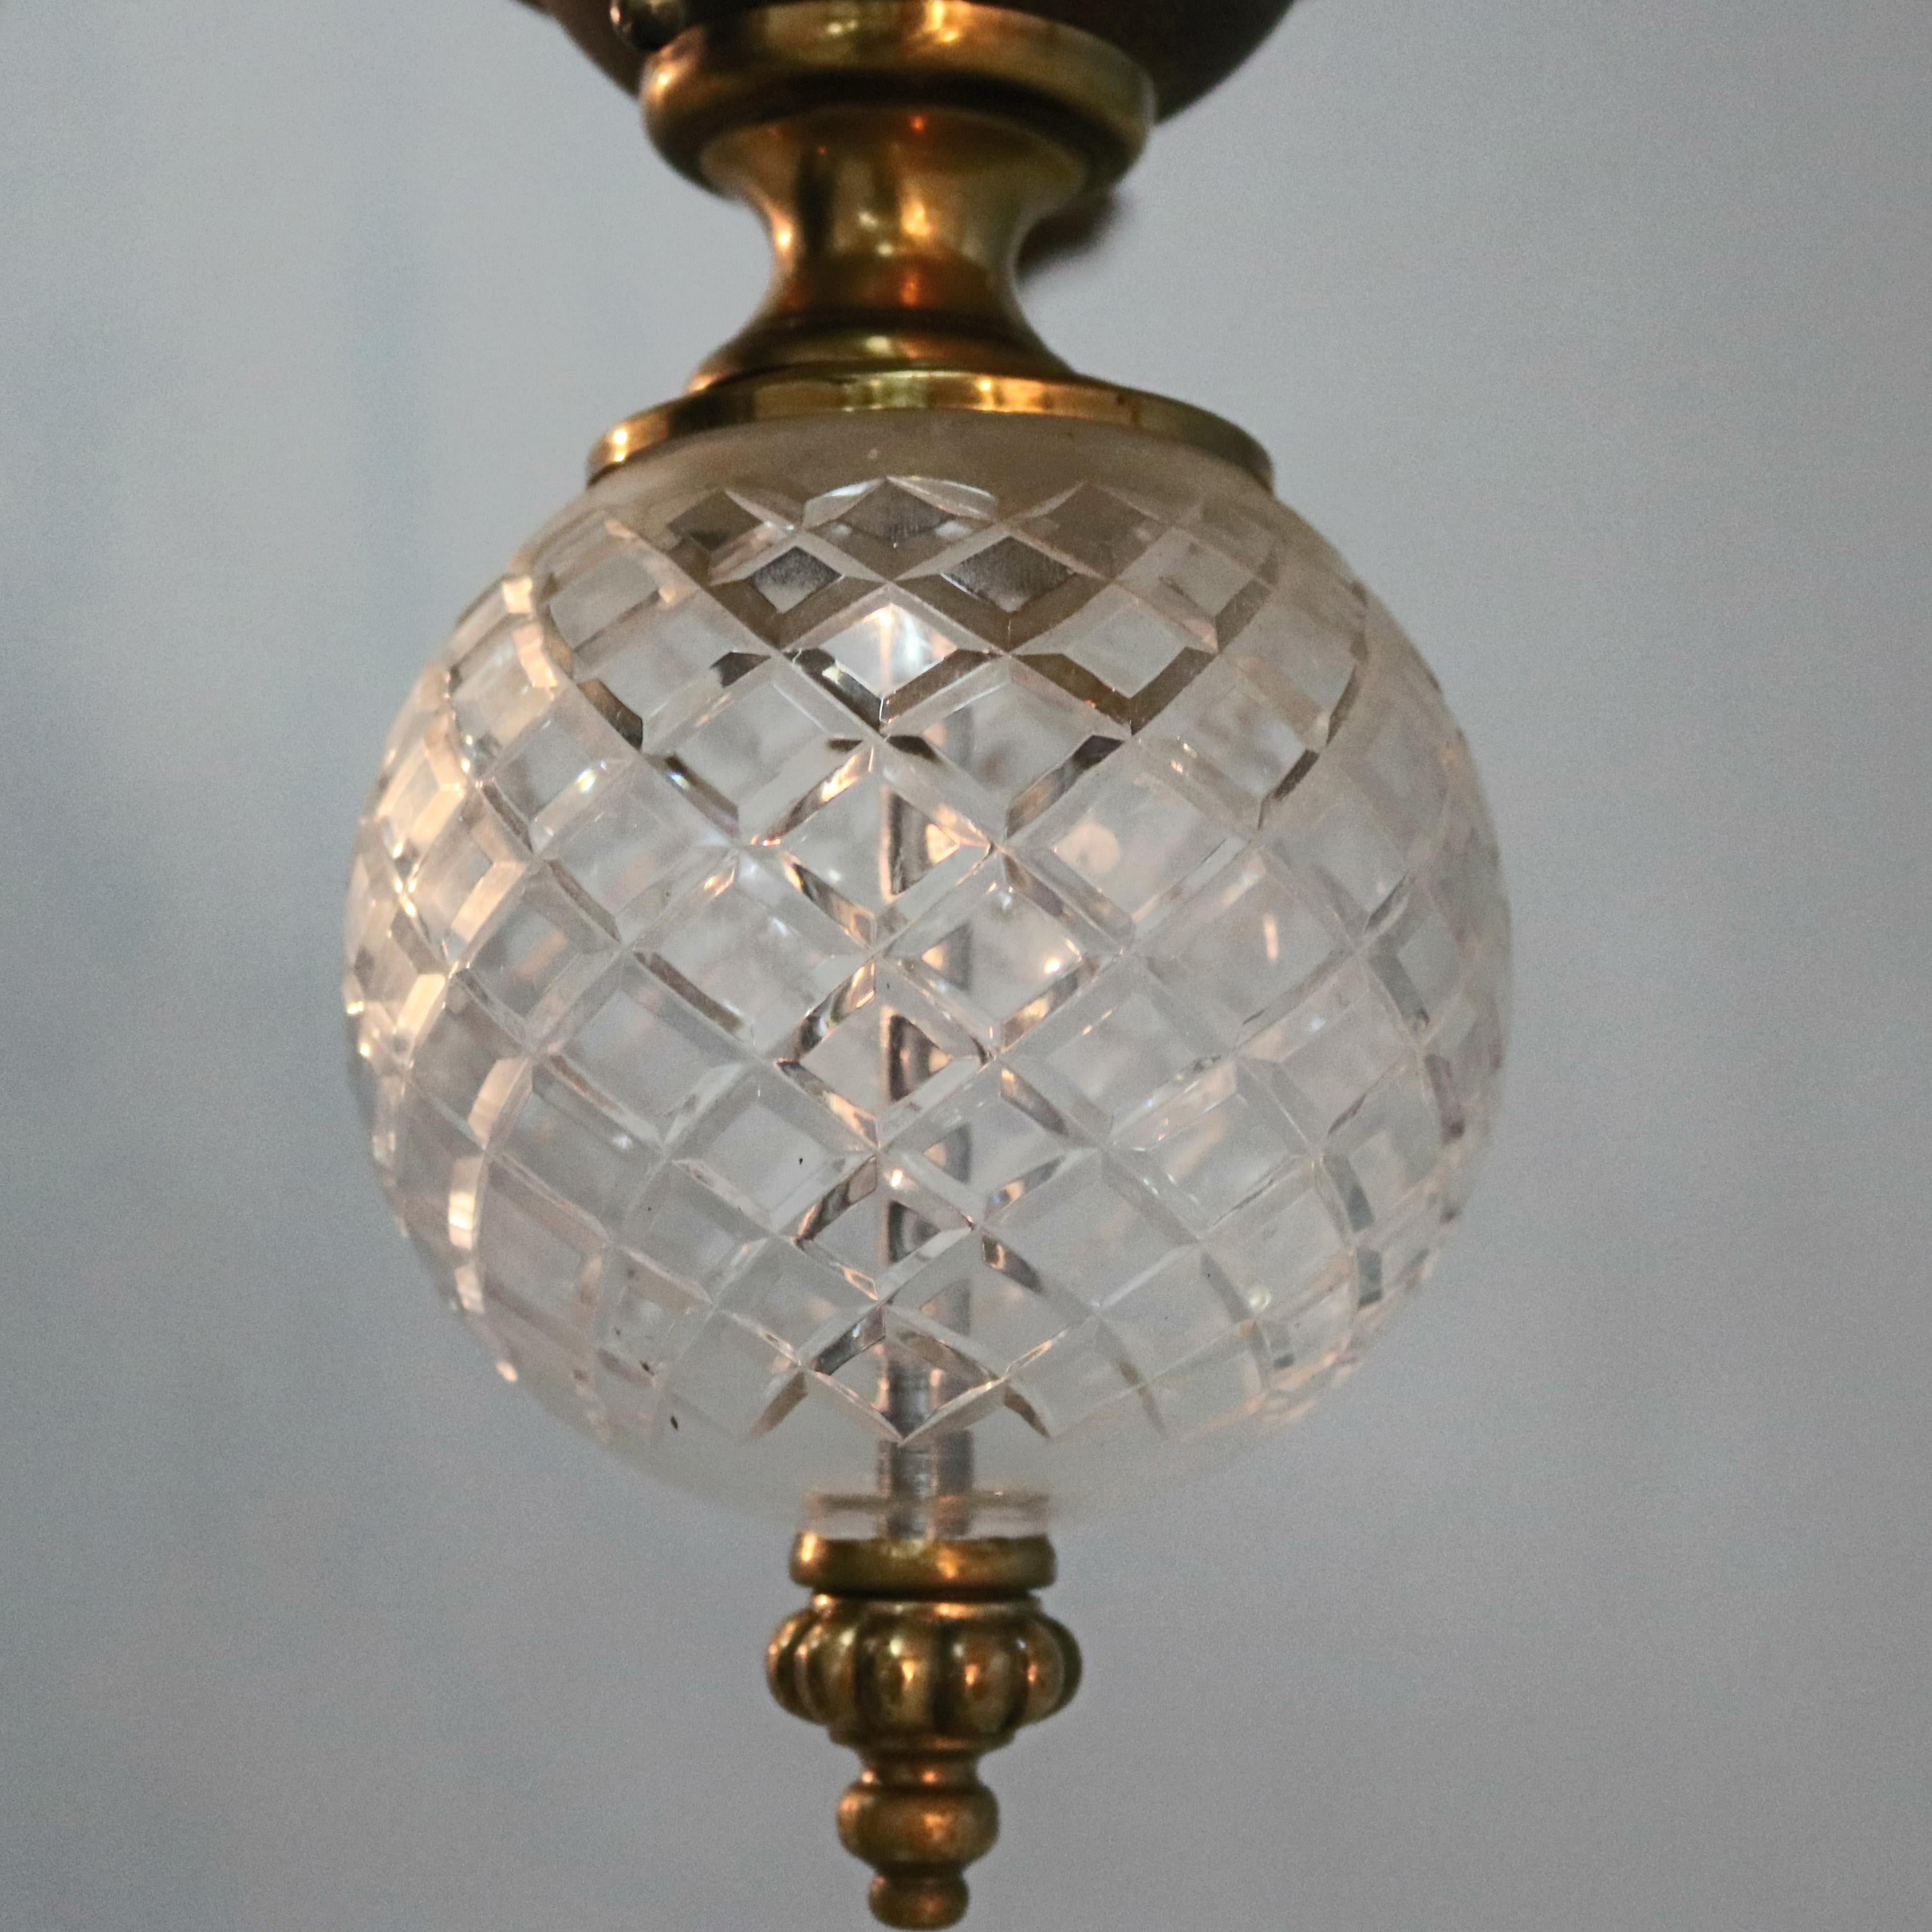 Vintage French Nine-Light Tiered Brass and Crystal Chandelier, 20th Century For Sale 7